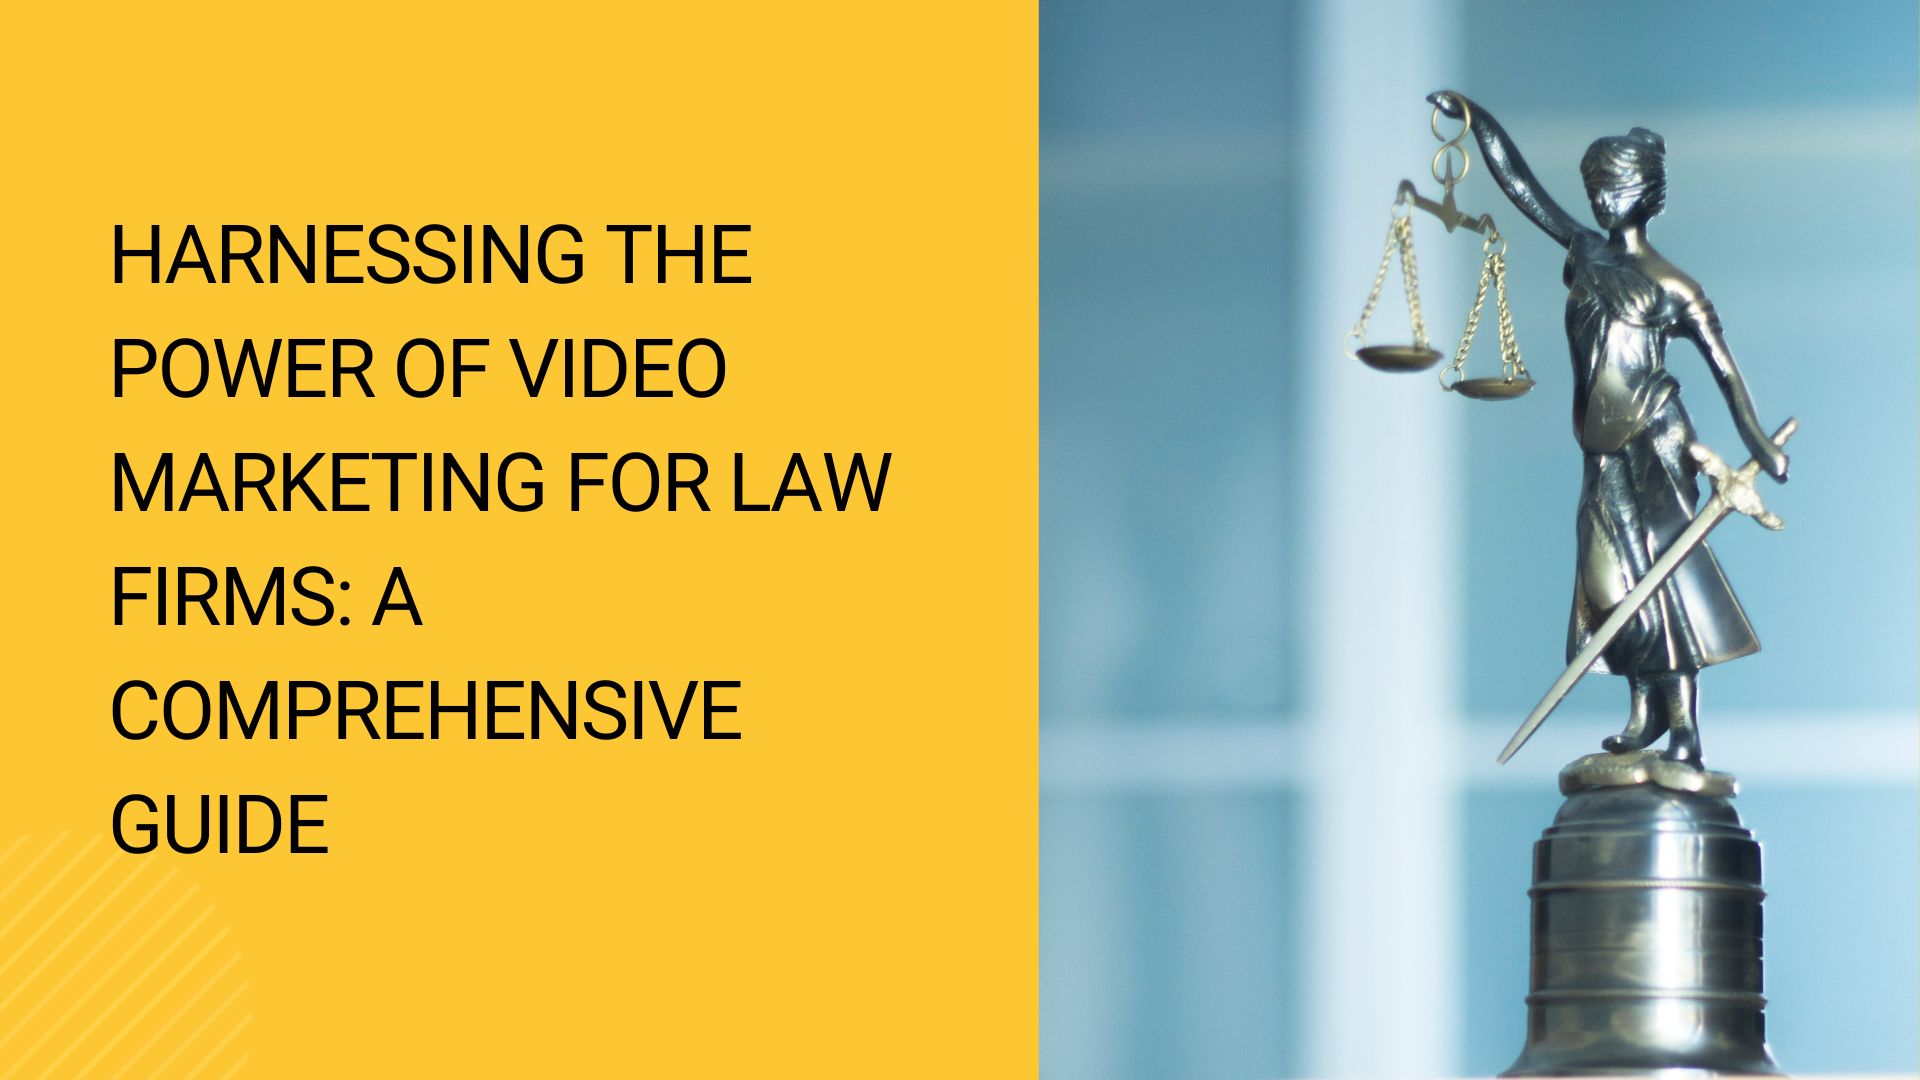 Harnessing the Power of Video Marketing for Law Firms: A Comprehensive Guide